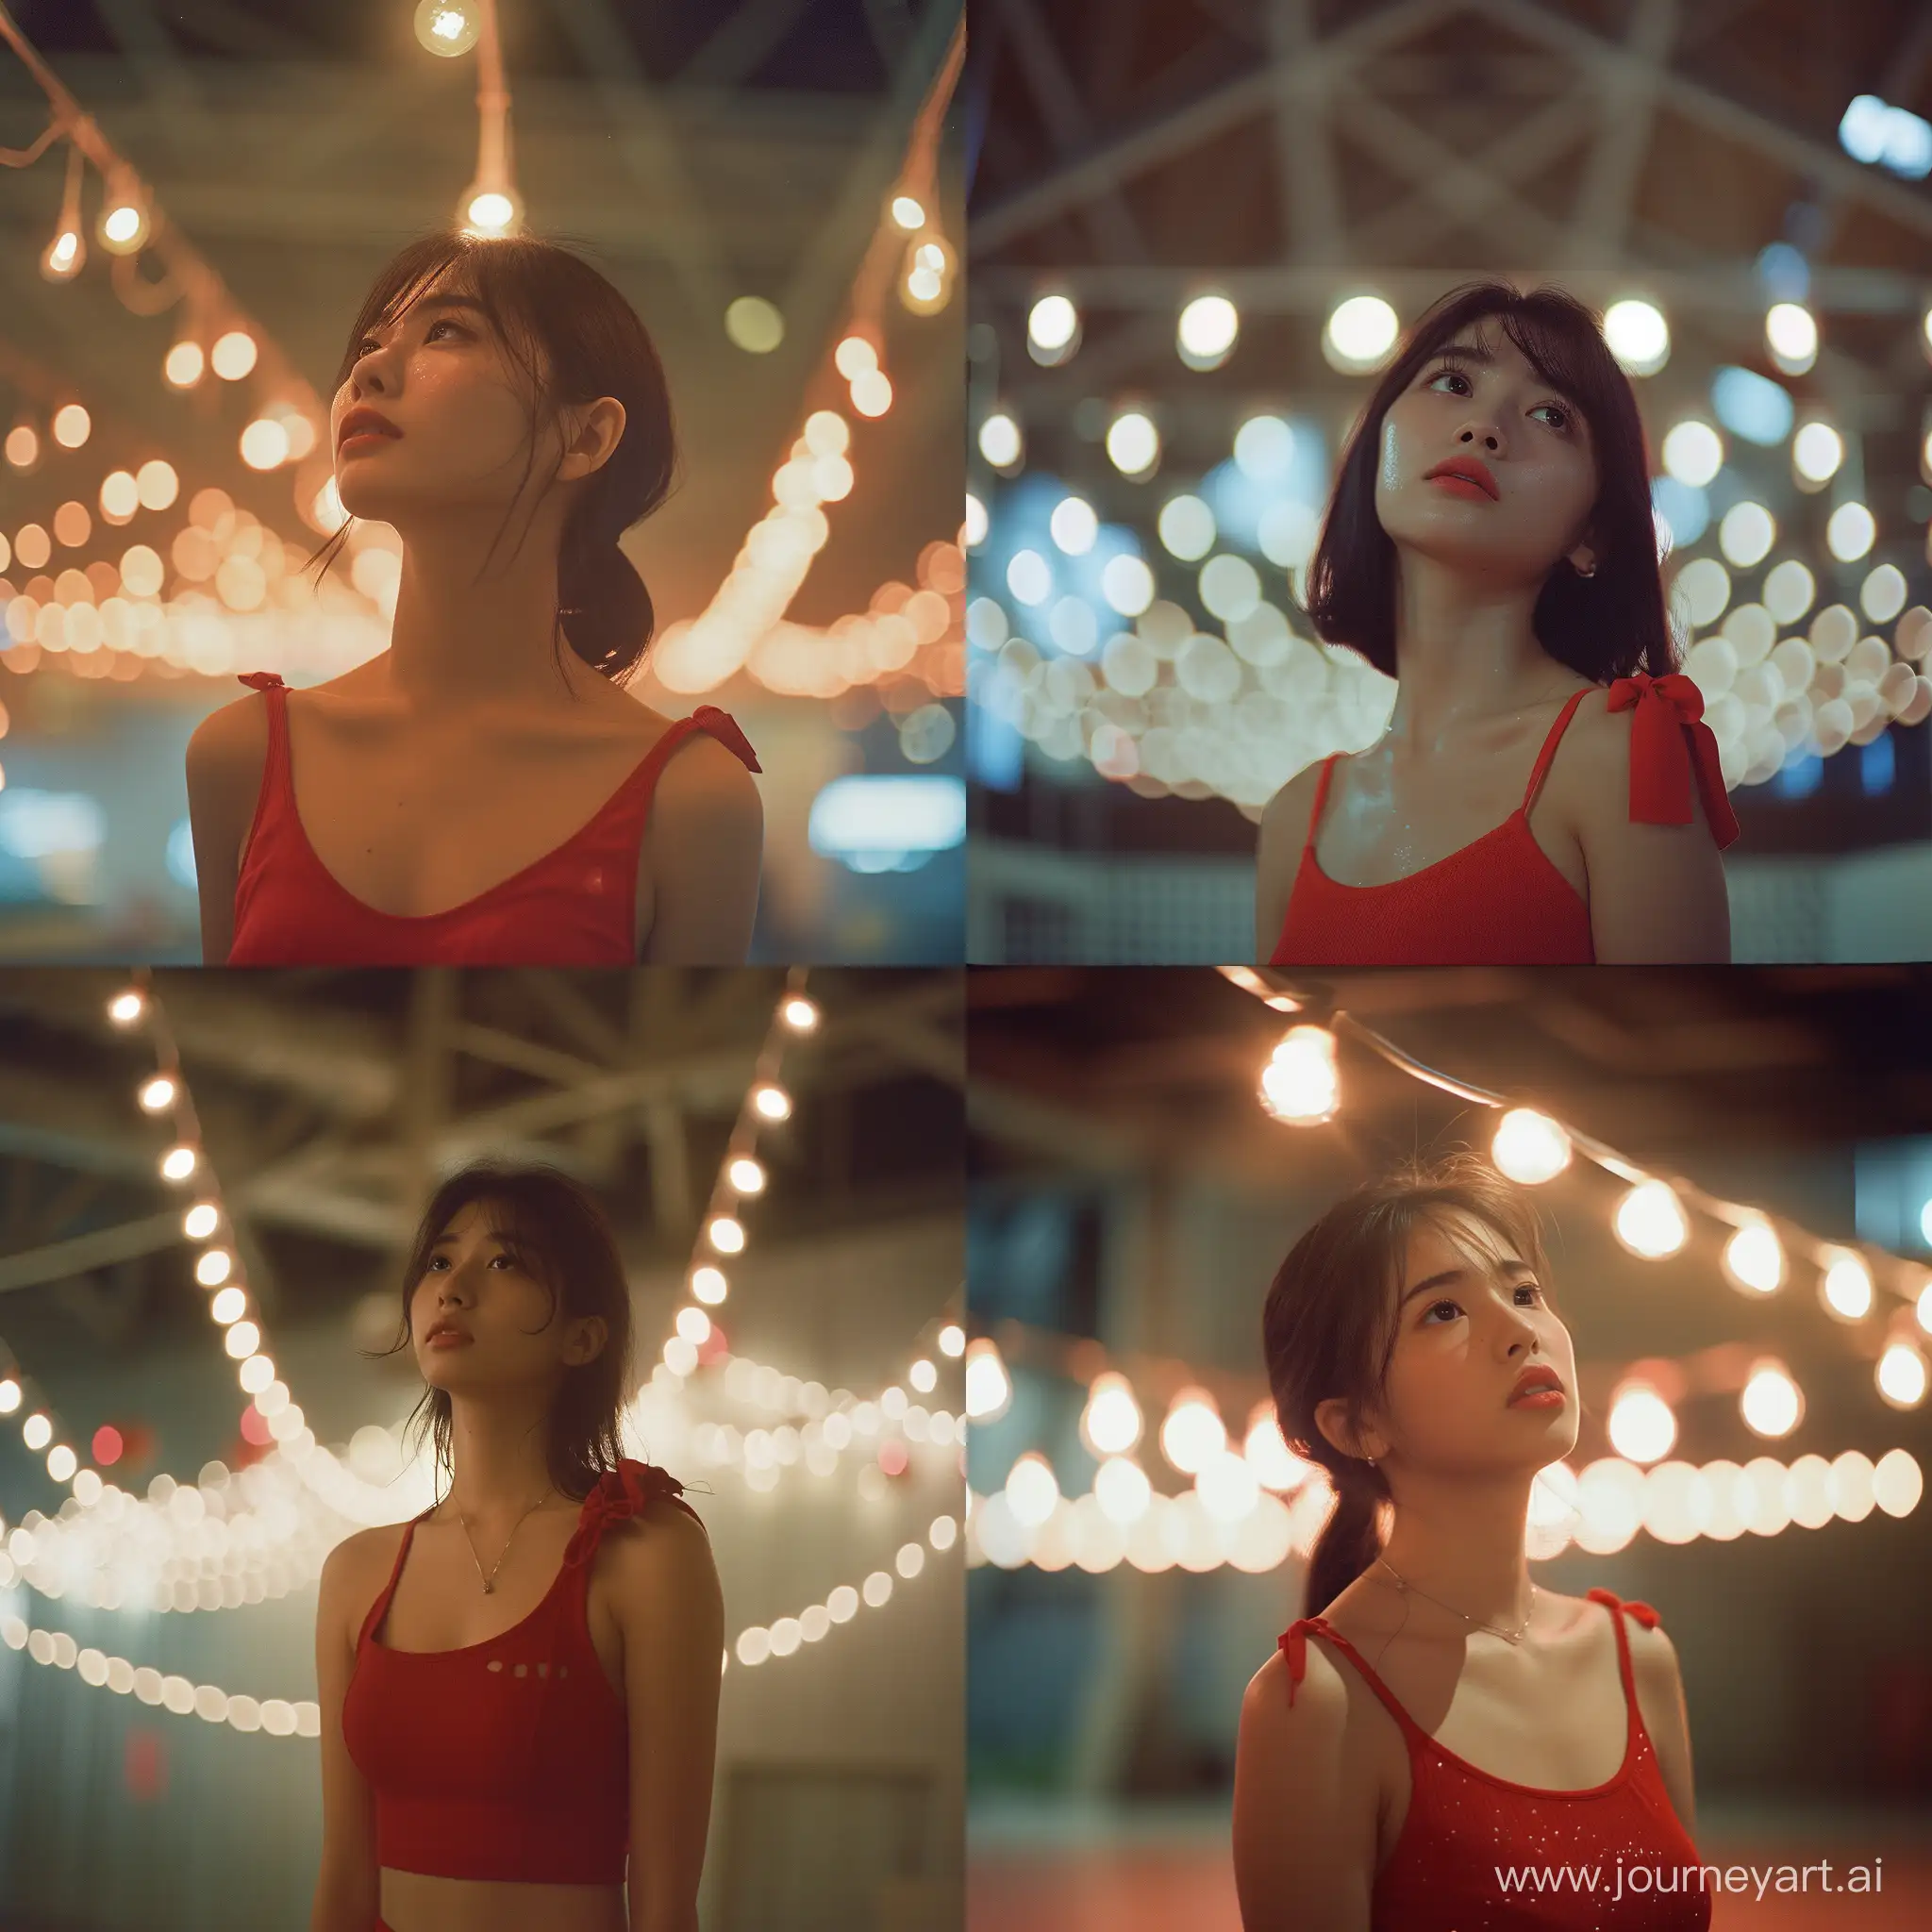 Nostalgic-Valentines-Day-Celebration-Taiwanese-Girl-in-Red-Tank-Top-Under-Exhibition-Hall-Lights